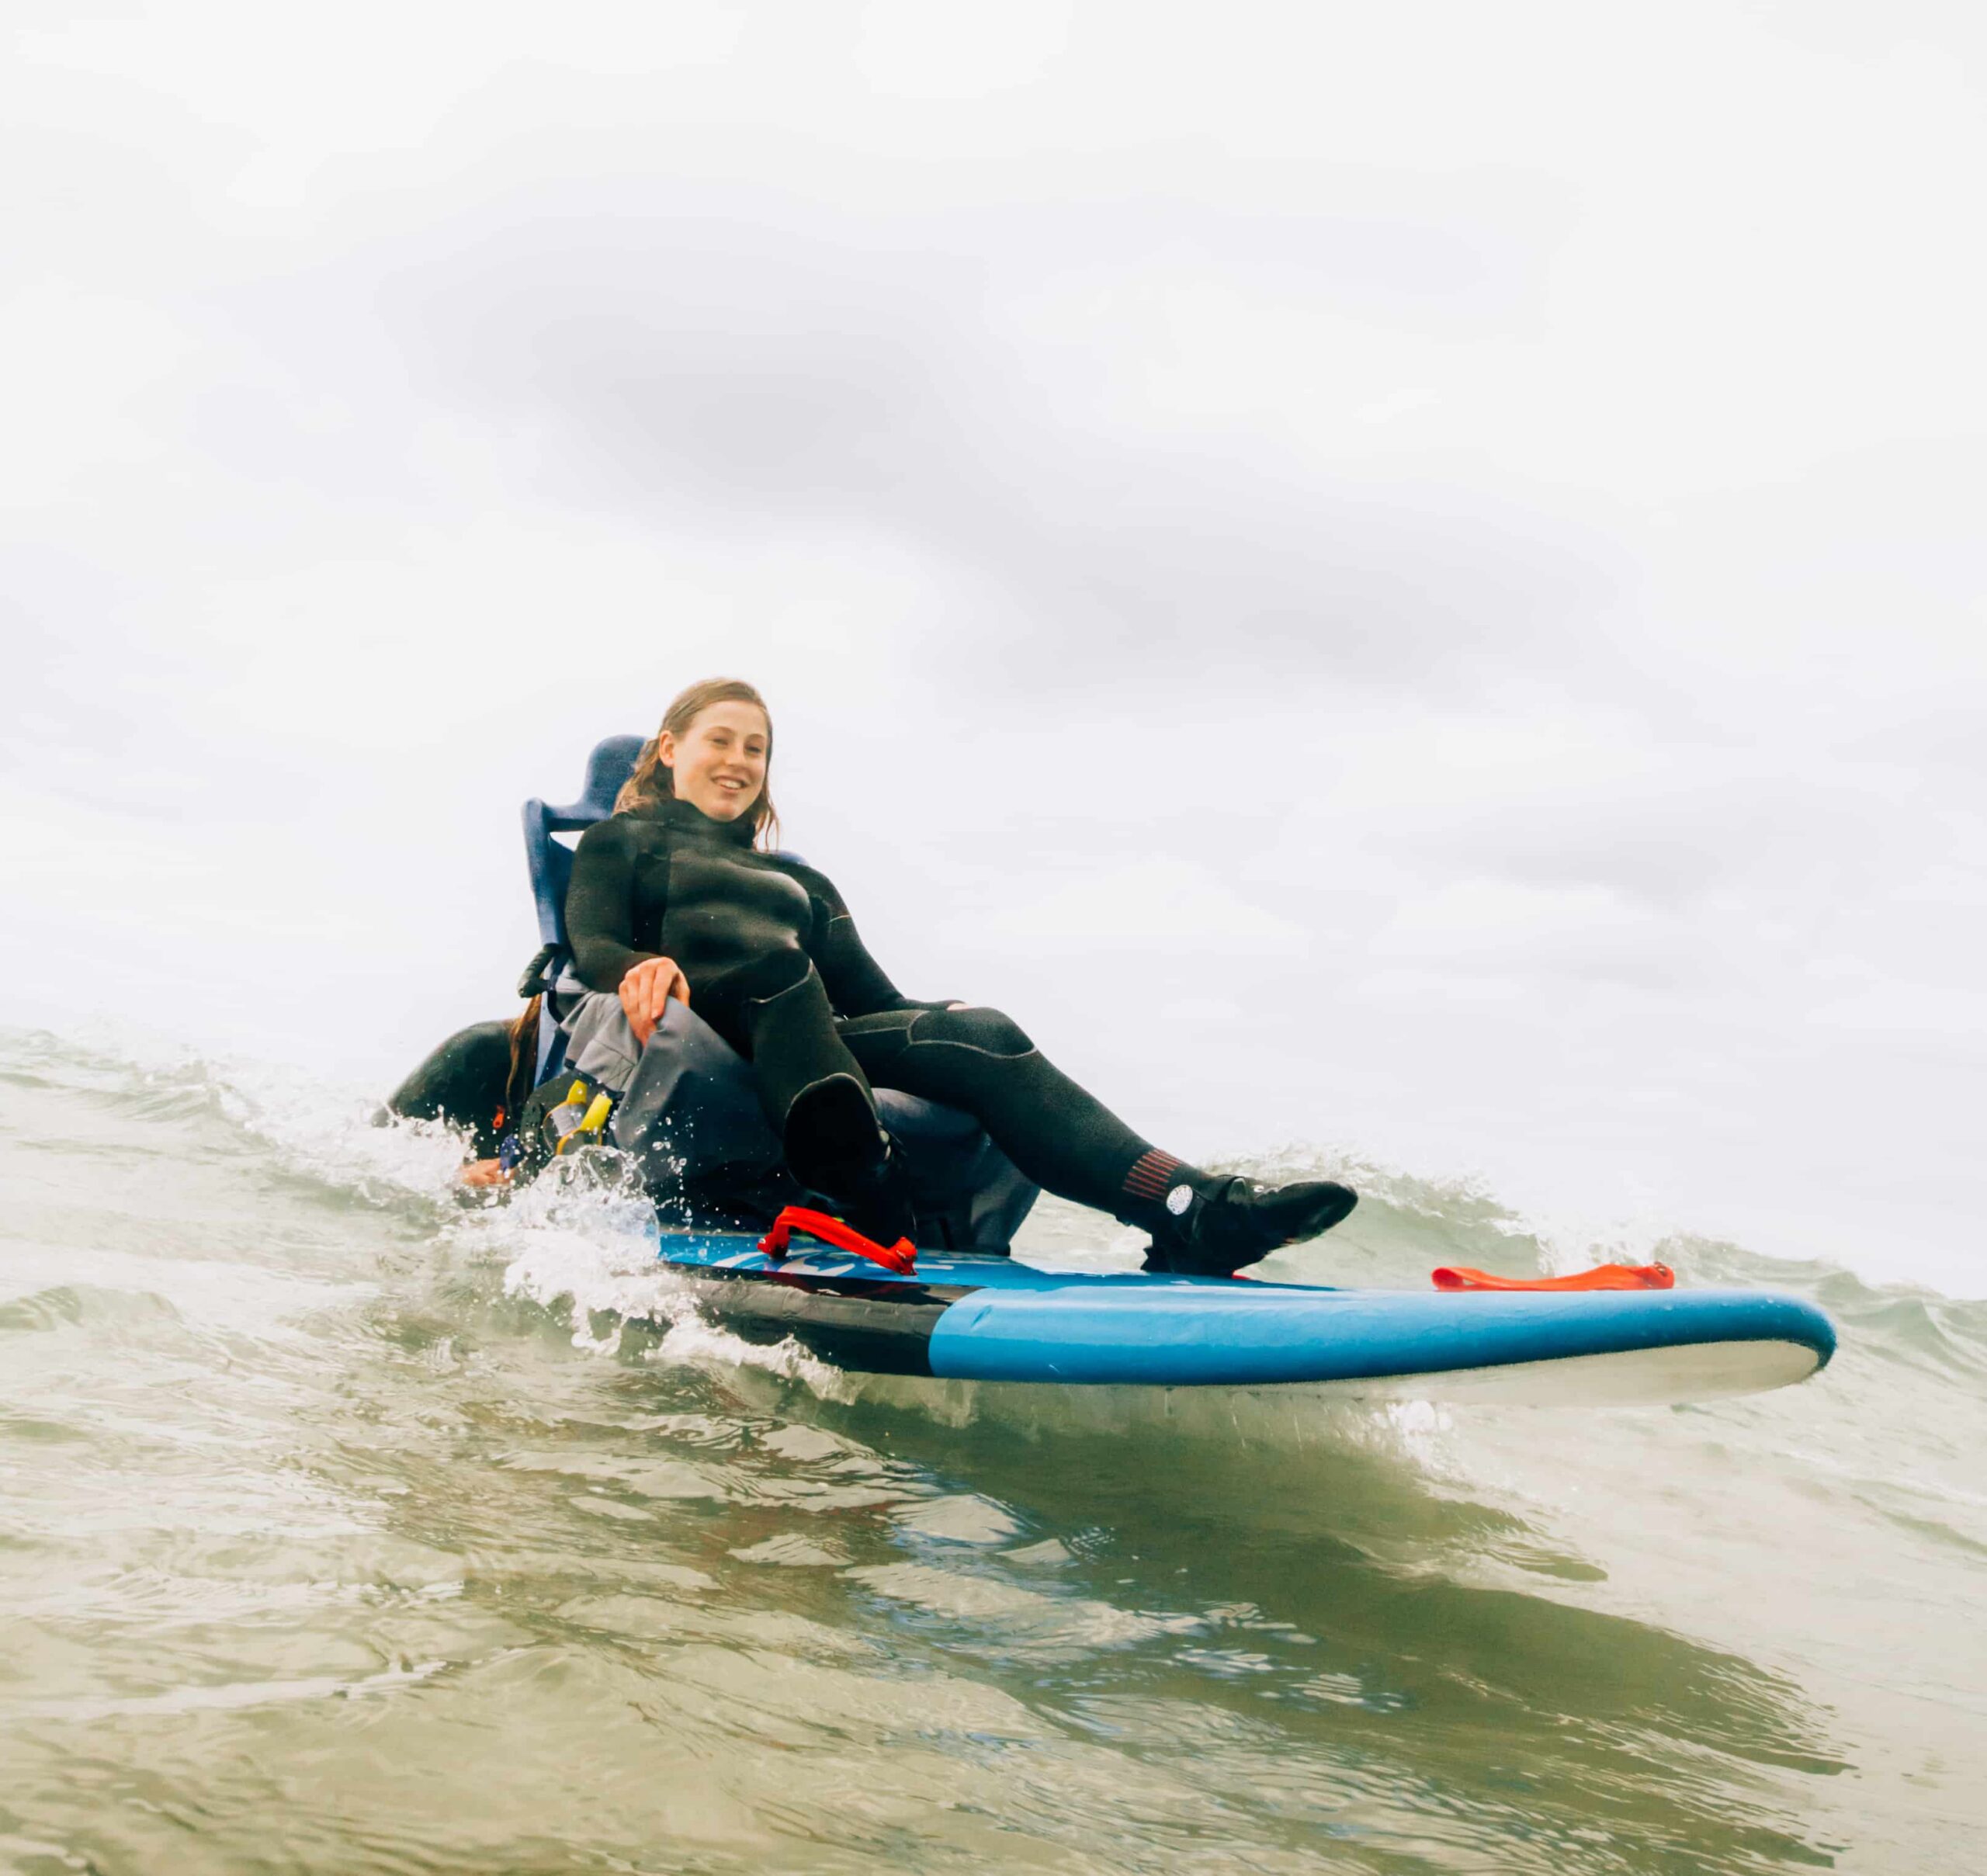 Surf training with the seated surfboard